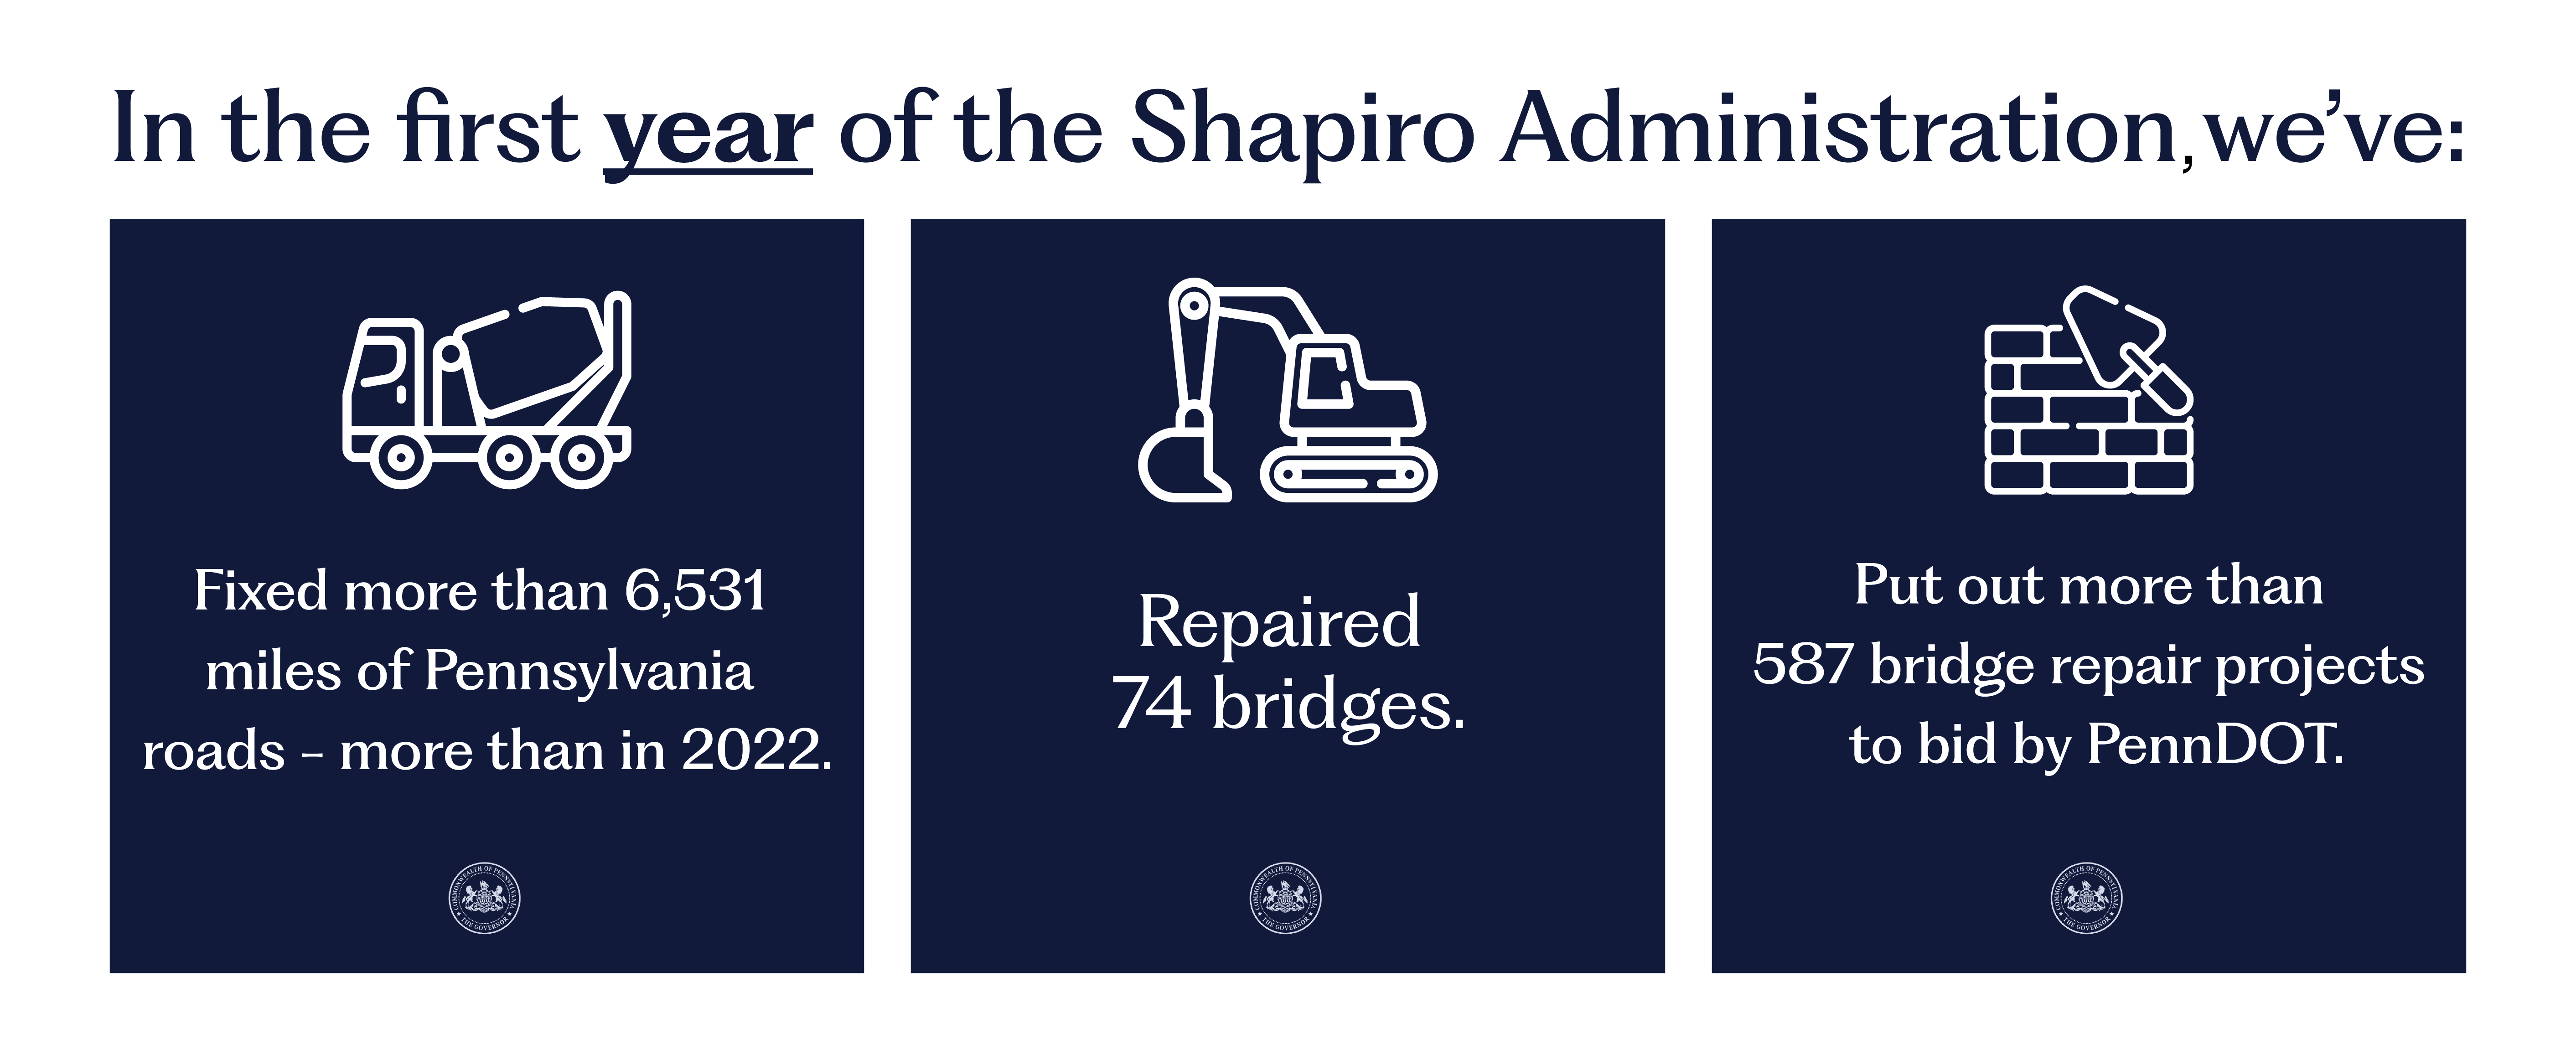 An infographic that reads "In the first year of the Shapiro Administration we've: fixed more than 6,531 miles of Pennsylvania roads, more than in 2022, repaired 74 bridges, and put out more than 587 bridge repair projects to bid by PennDOT."